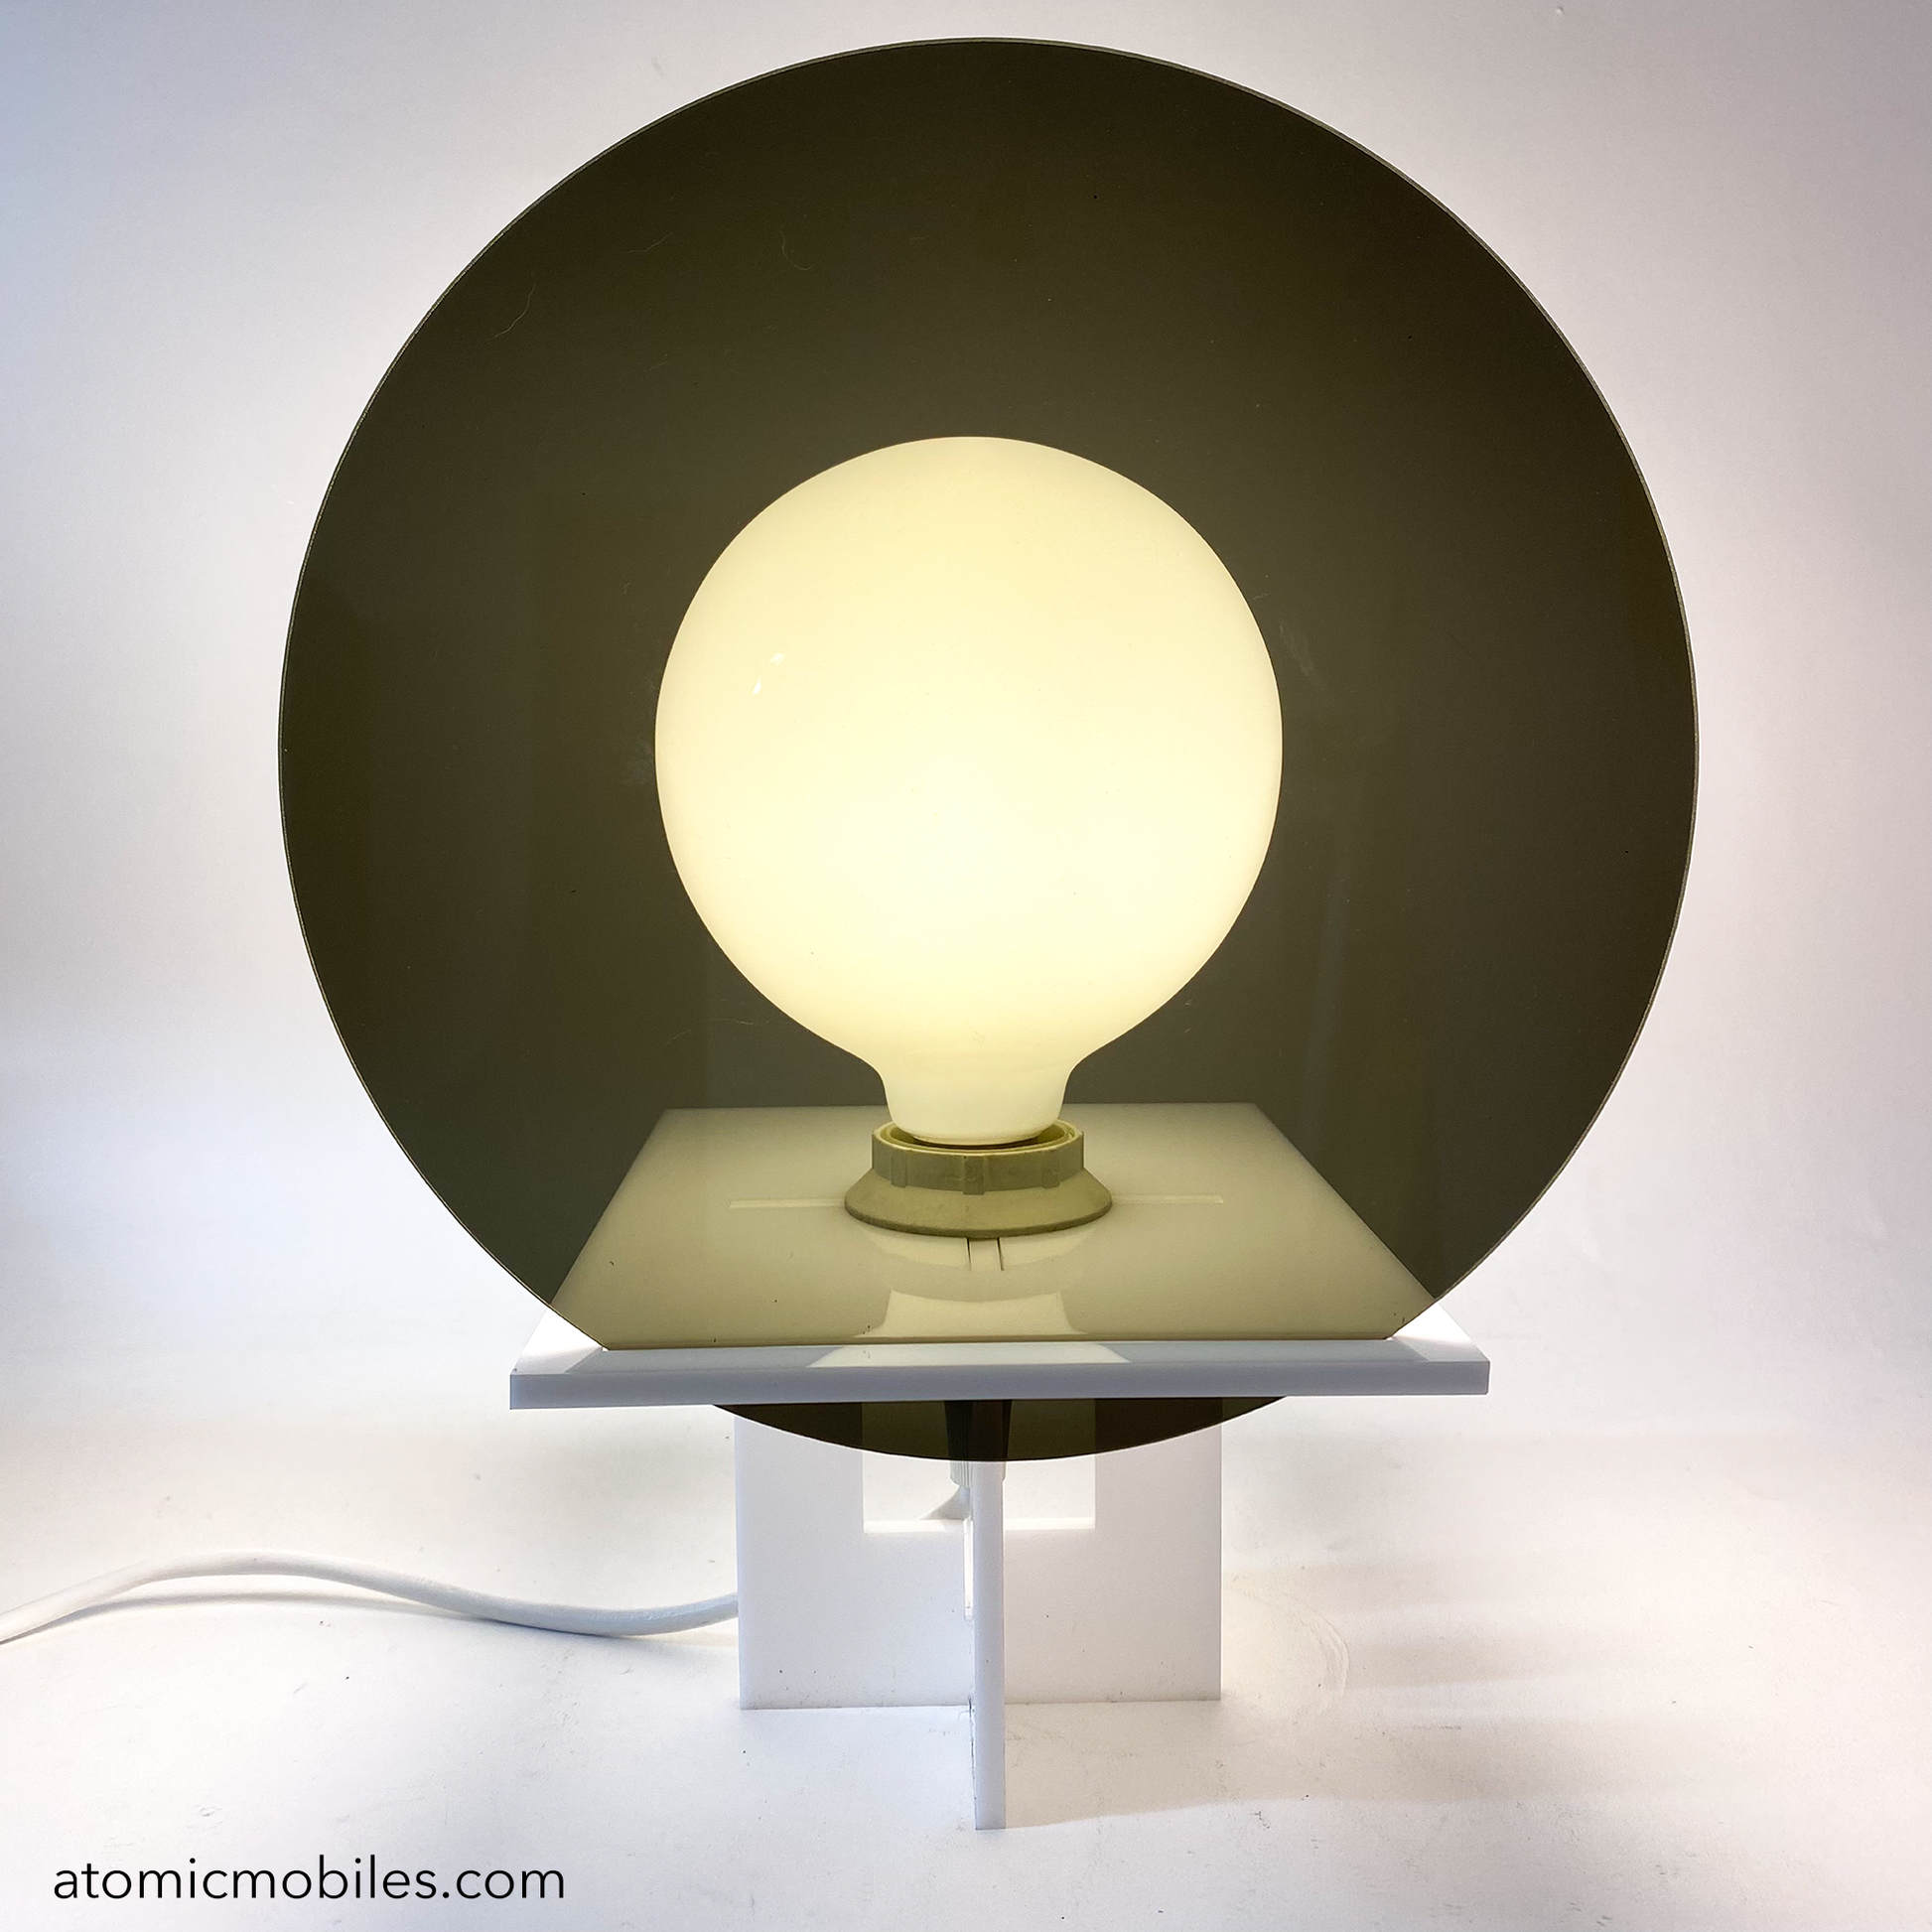 RETROSPECT Space Age Lamp by AtomicMobiles.com with Smoky Gray round lens cover over globe light bulb